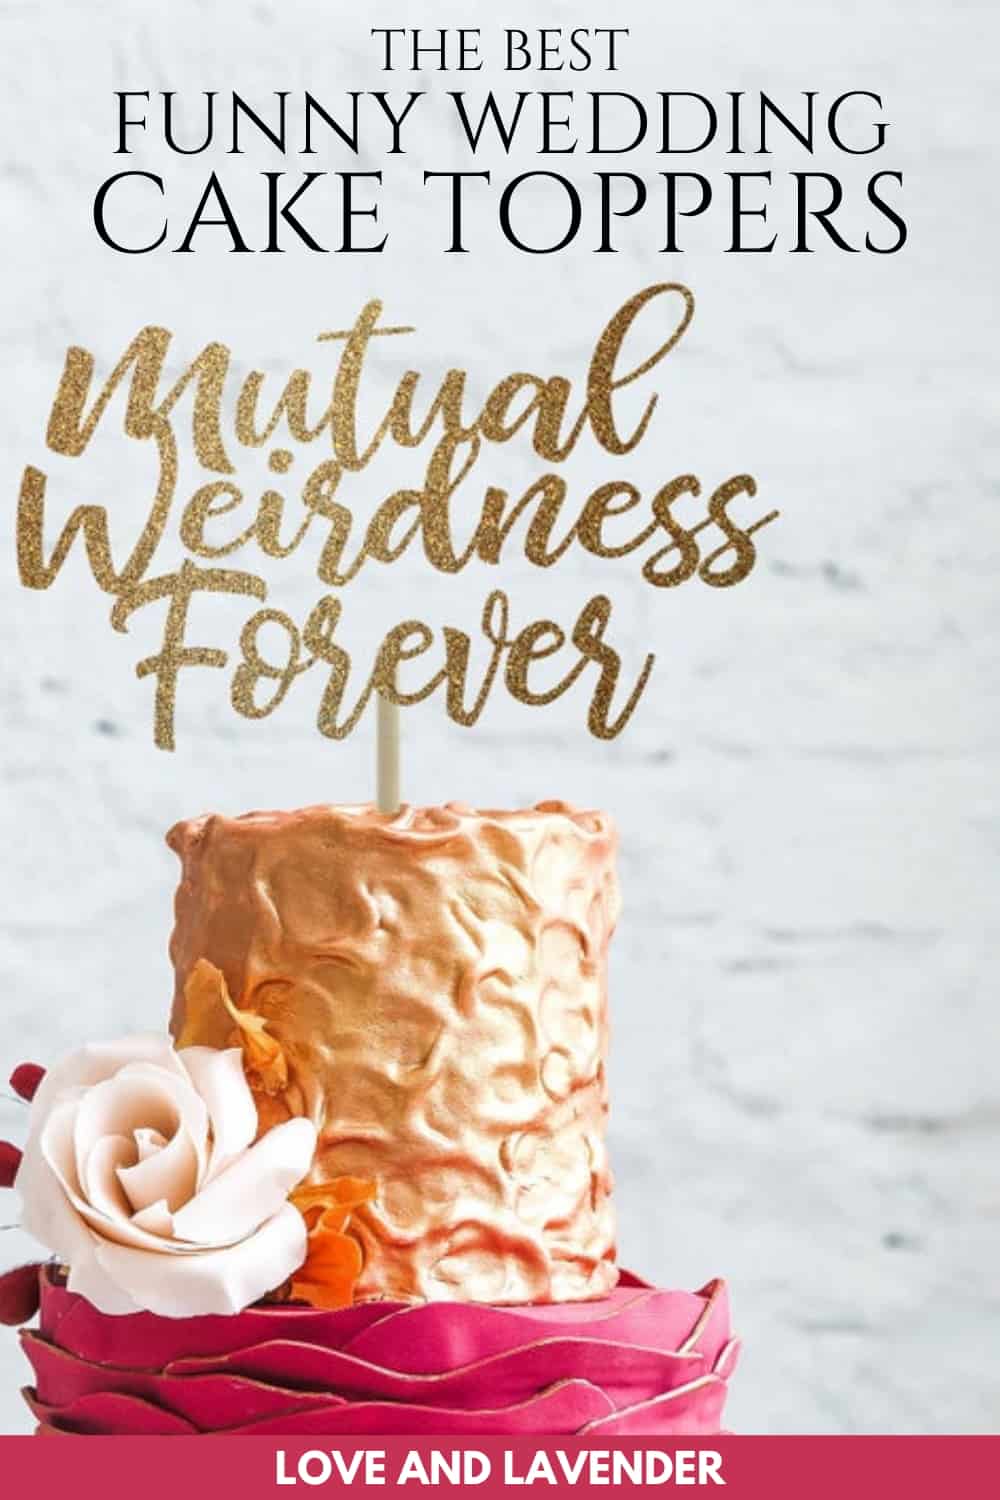 Pinterest pin - funny wedding cake toppers